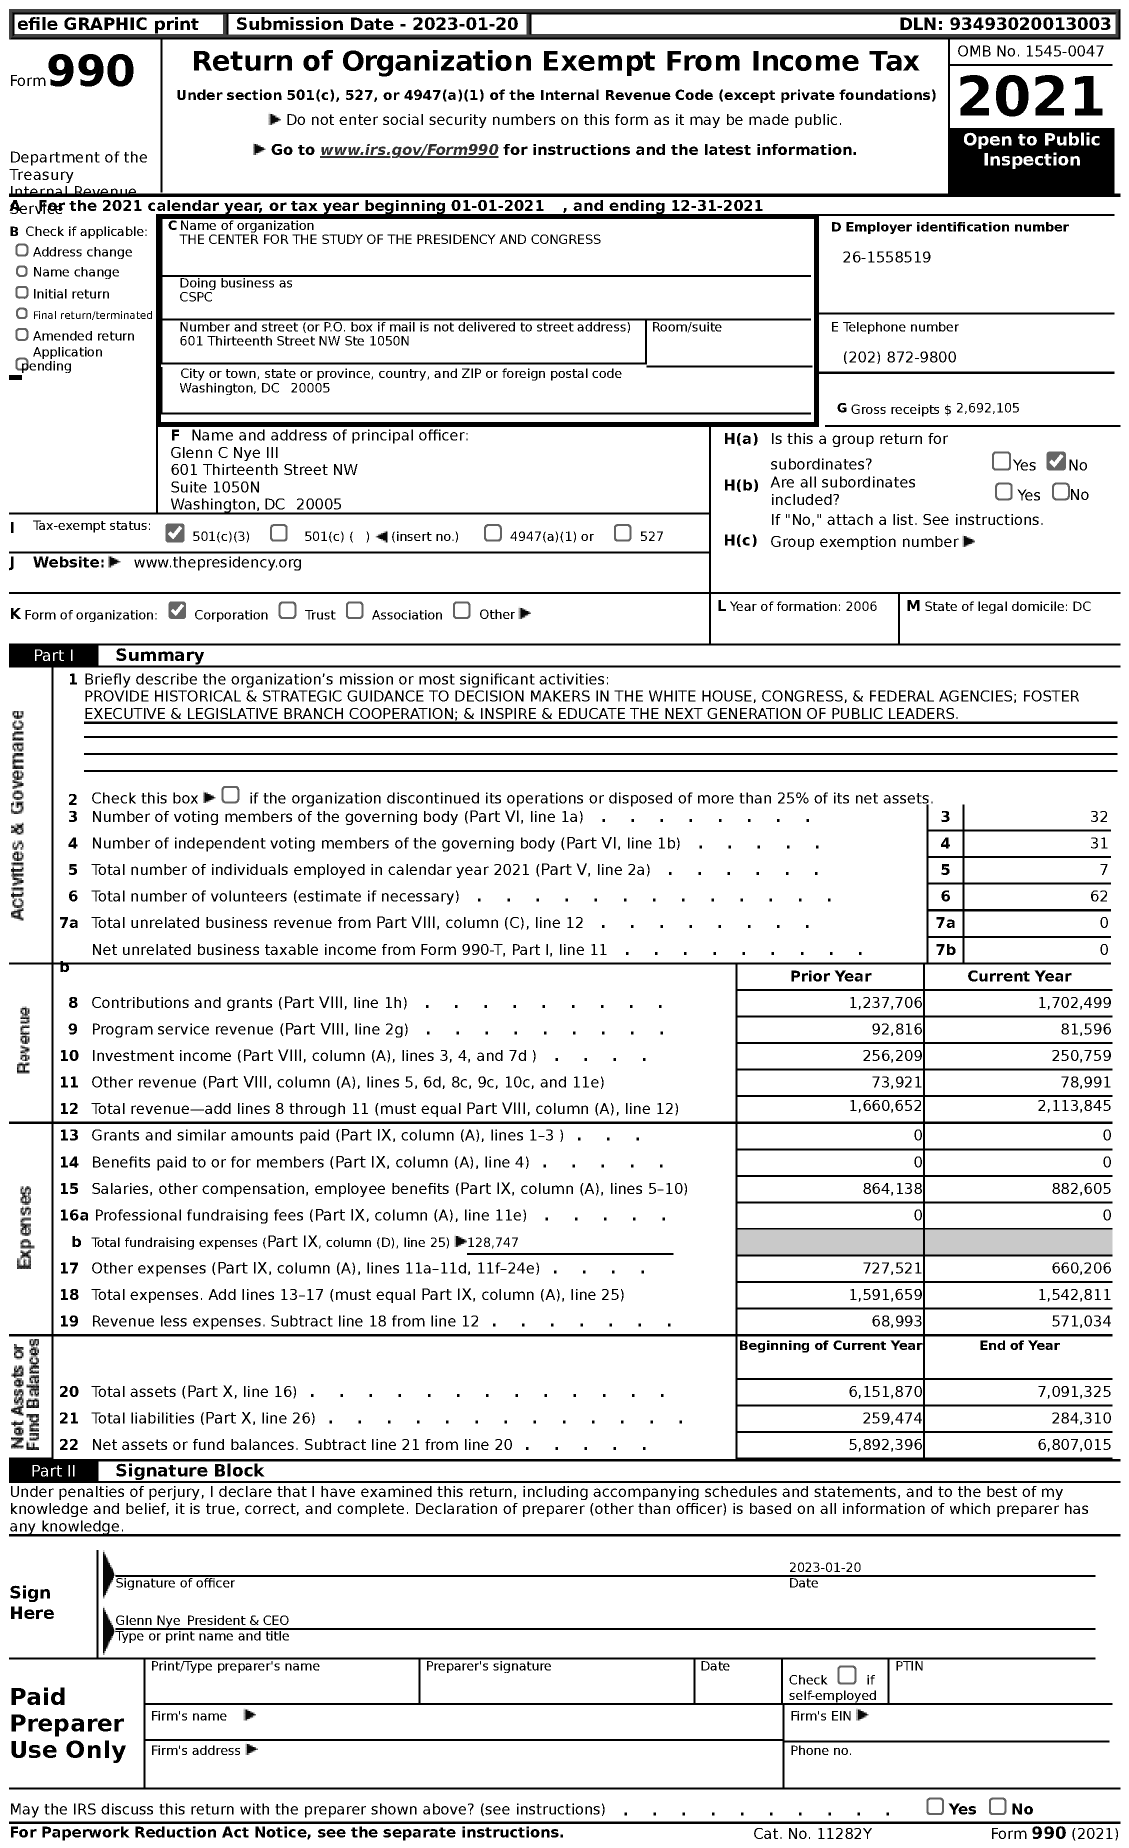 Image of first page of 2021 Form 990 for Center for the Study of the Presidency and Congress (CSPC)